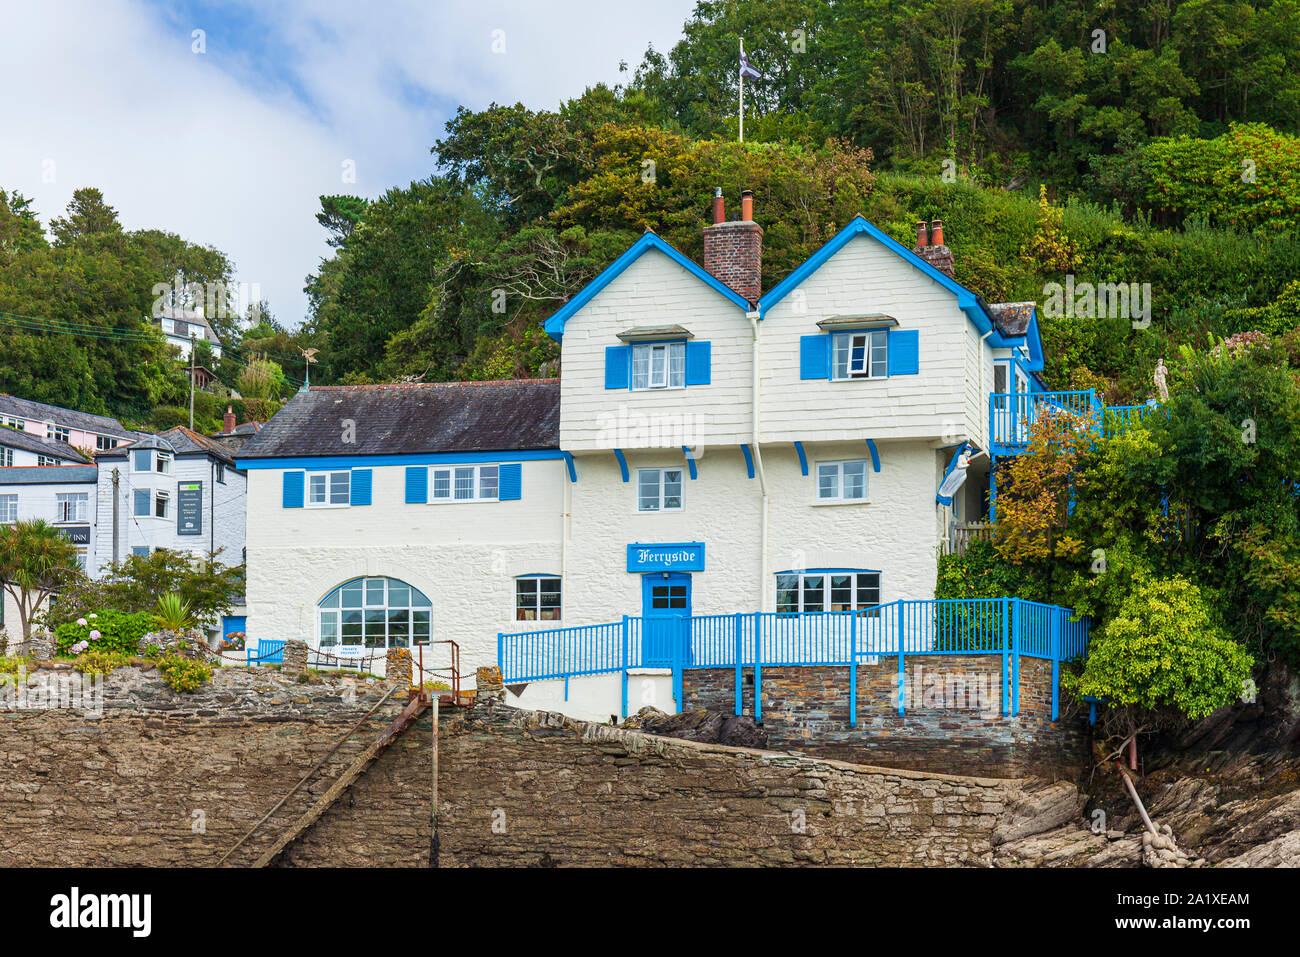 Ferryside the former home of author Daphne Du Maurier. Bodinnick by Fowey, Fowey, Cornwall. Stock Photo